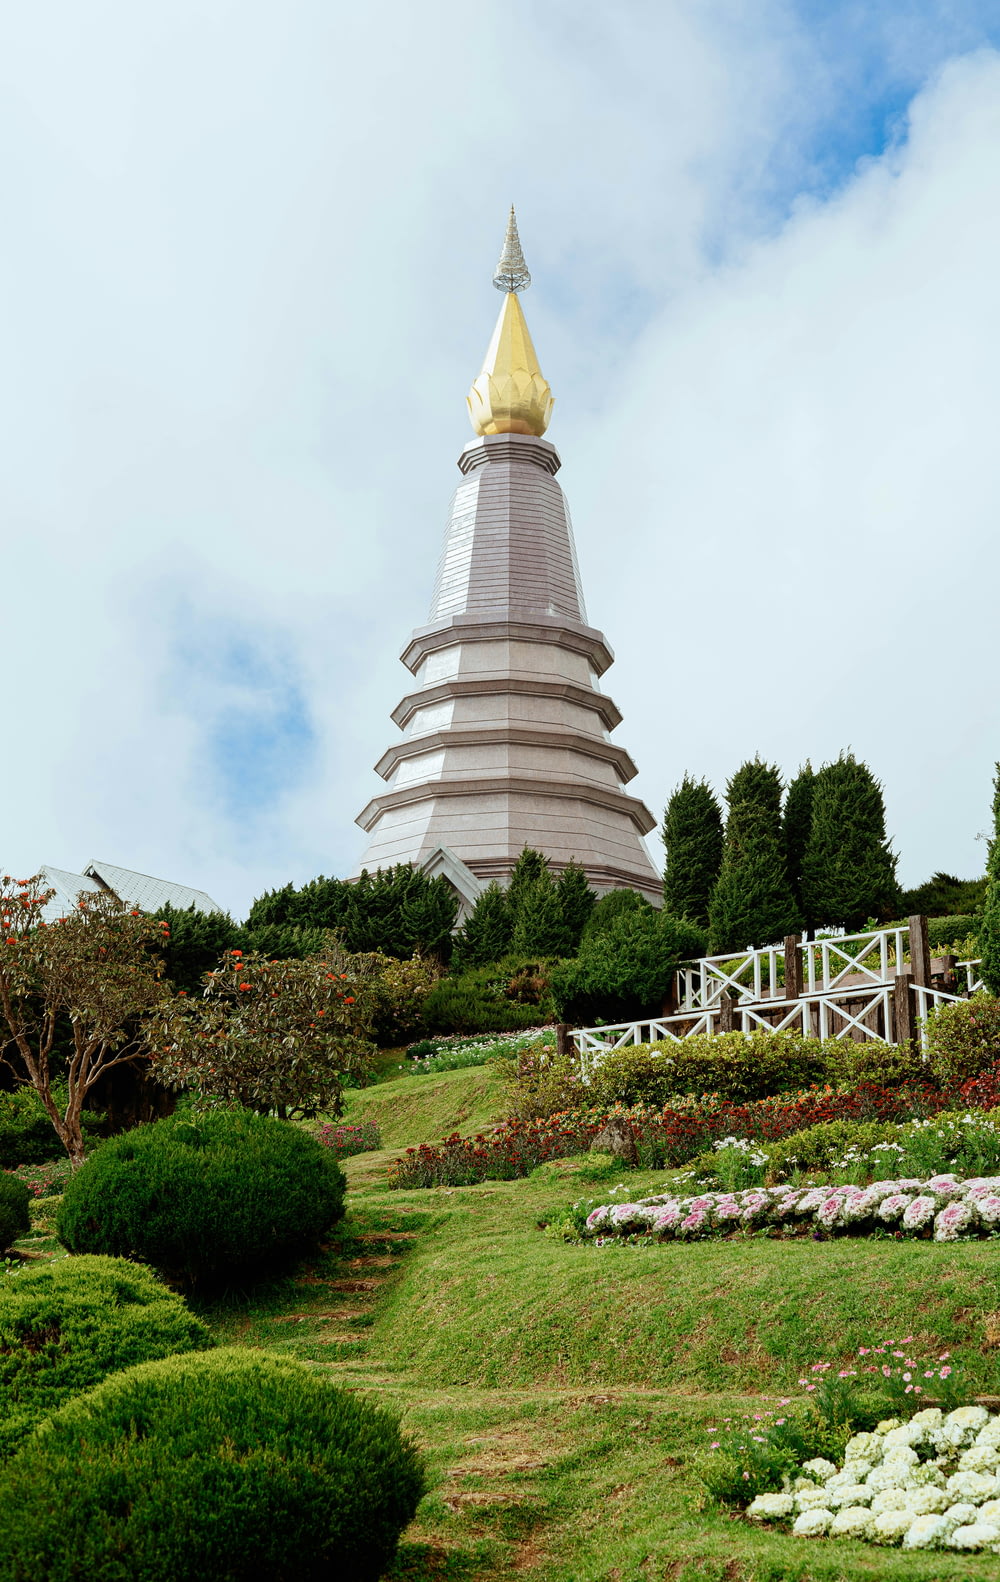 a very tall tower with a gold top in the middle of a garden